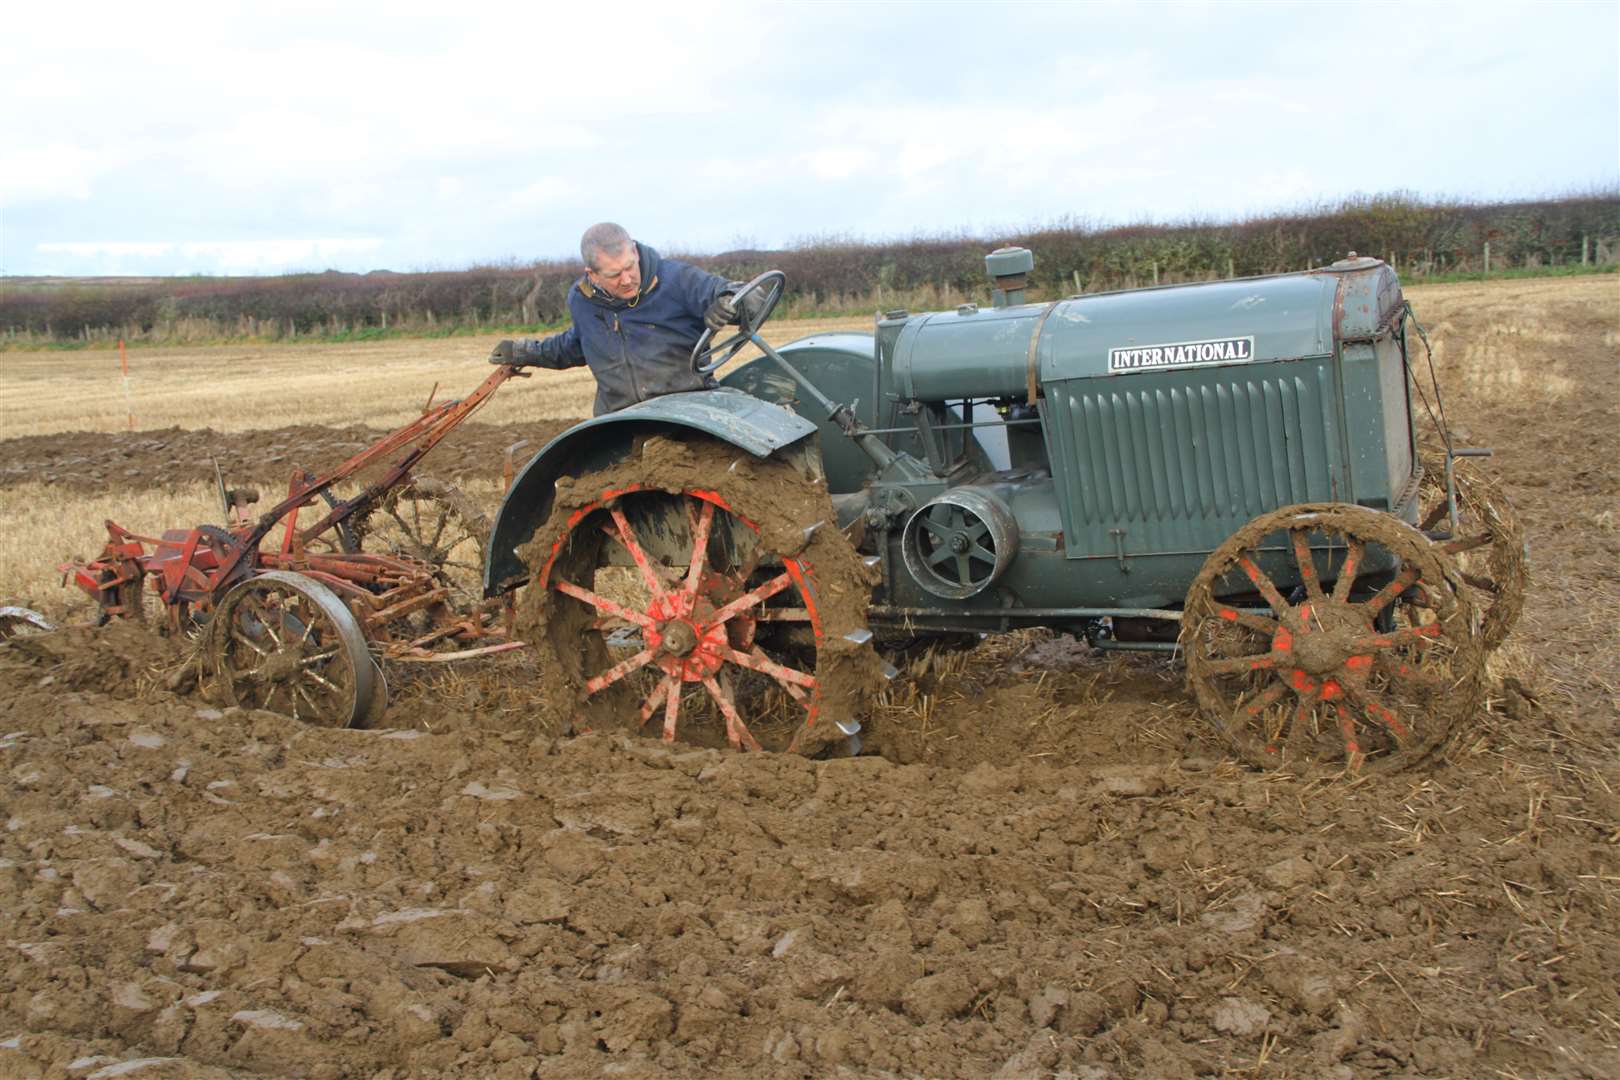 Michael Mackay, West Greenland, on his way to claiming the overall winner prize at Watten Mains. He was driving an impressive 90-year-old International with an International vintage training plough. Pictures: Willie Mackay